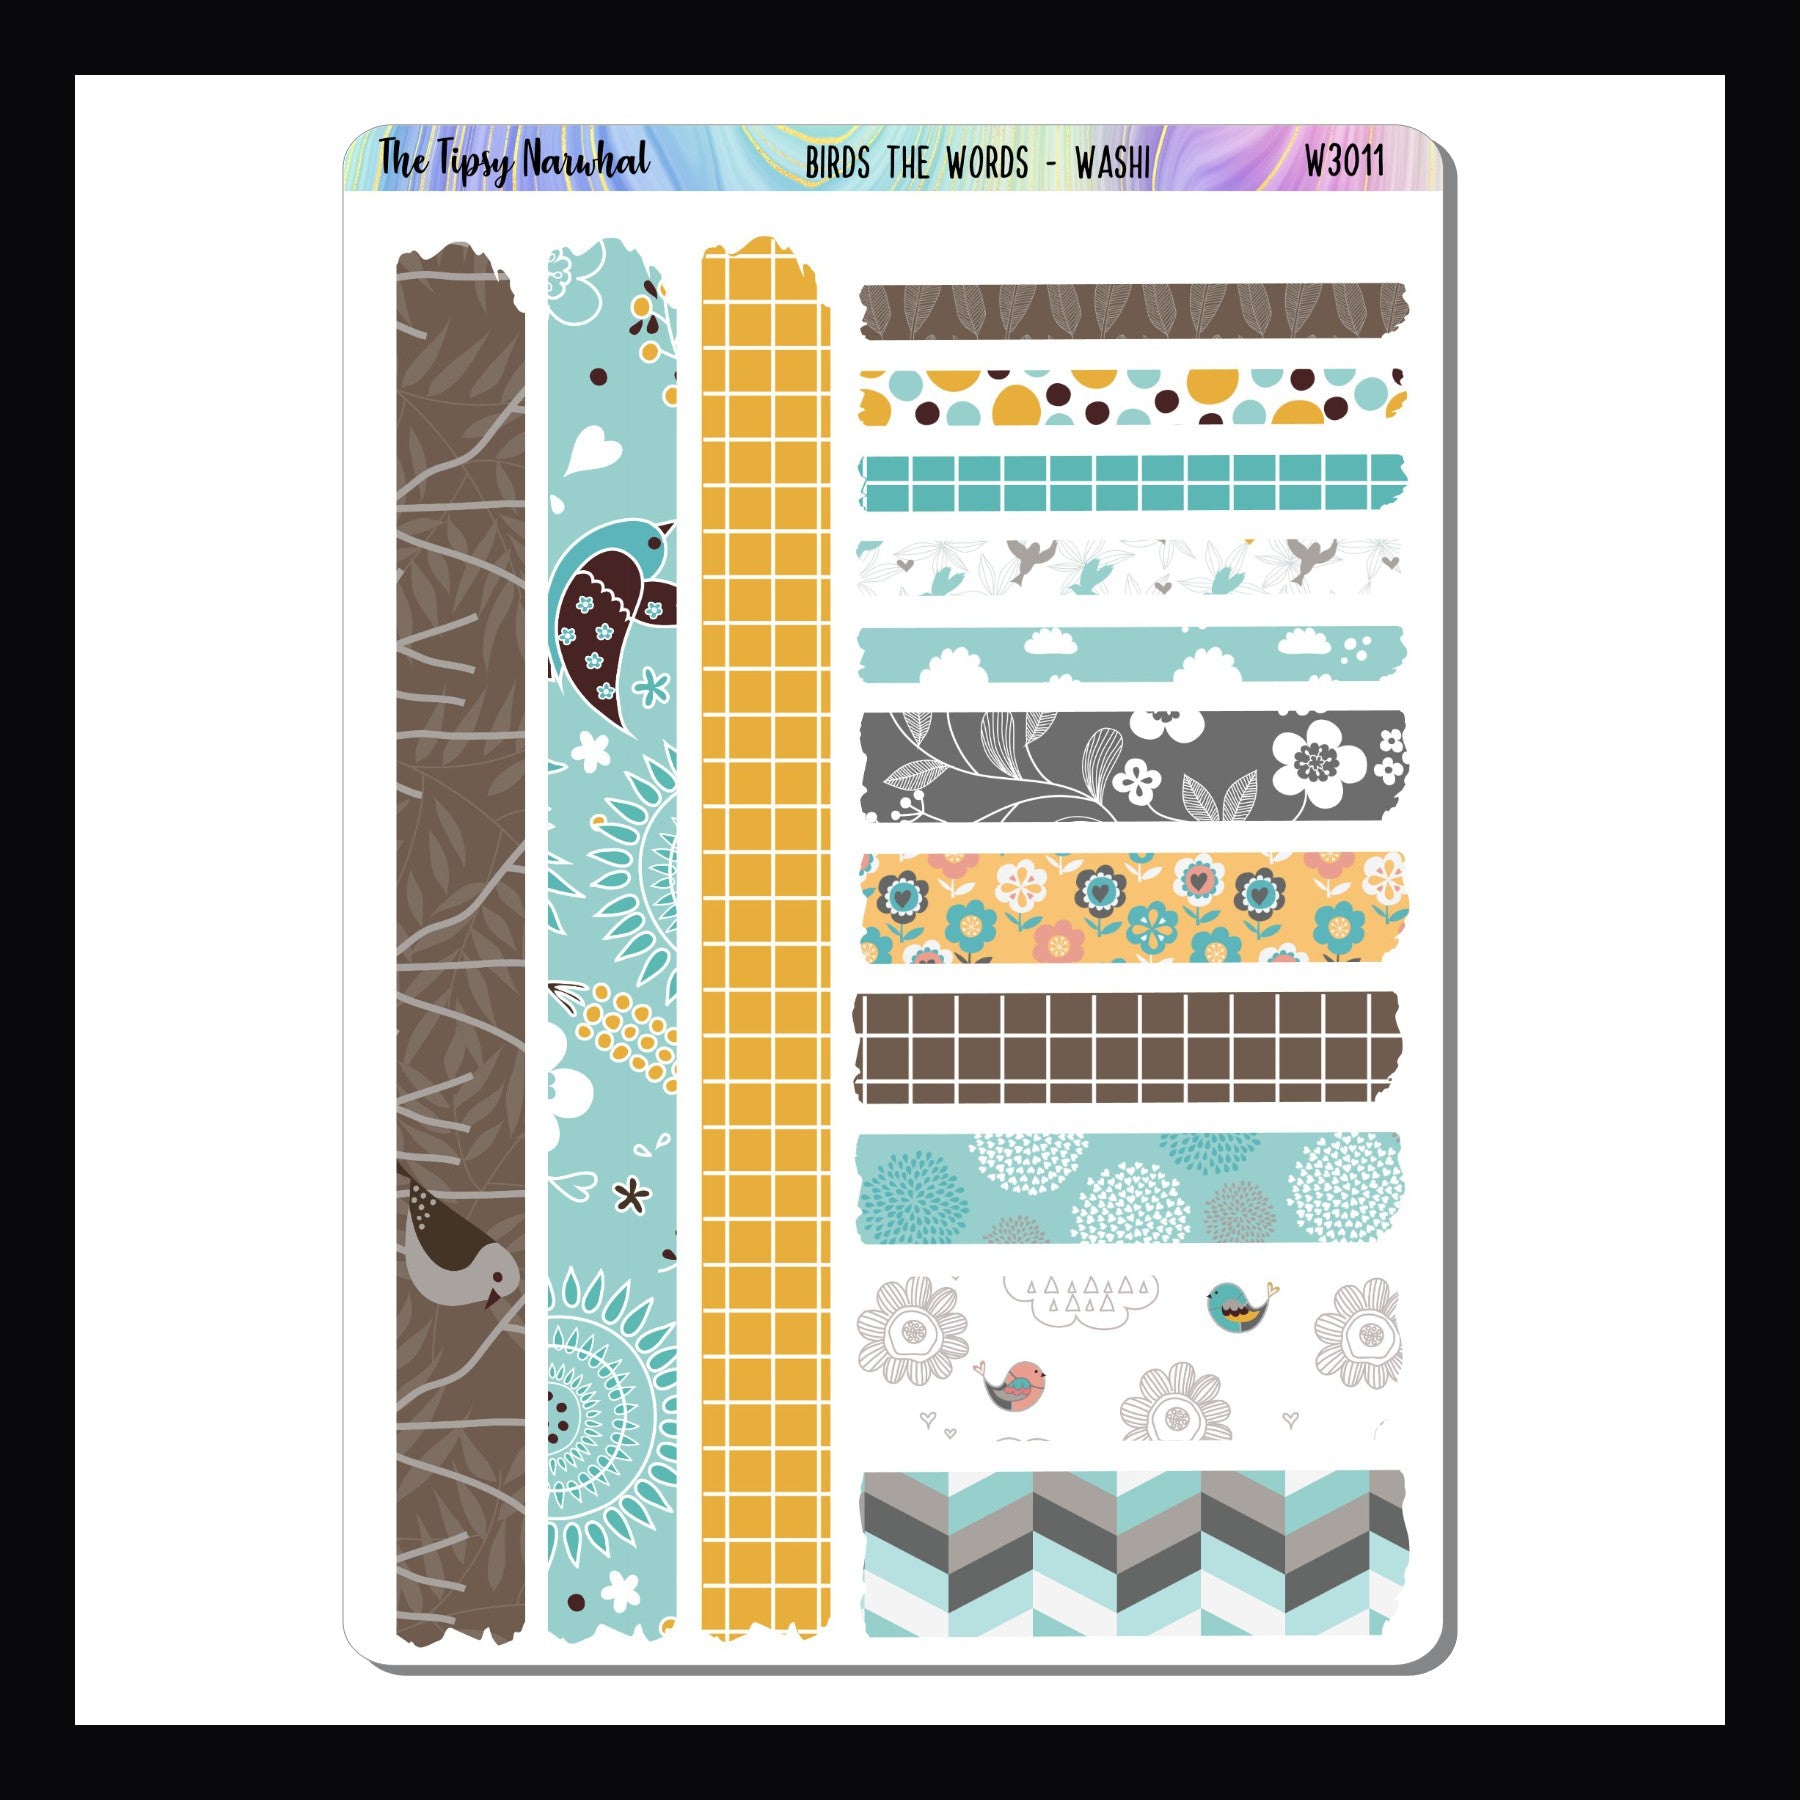 Digital Birds the Word Washi Sheet is a digital/printable version of the standard washi sheet.  It features 14 various washi tape-like stickers with patterns and colors that perfectly coordinate with the Birds the Word kits. 